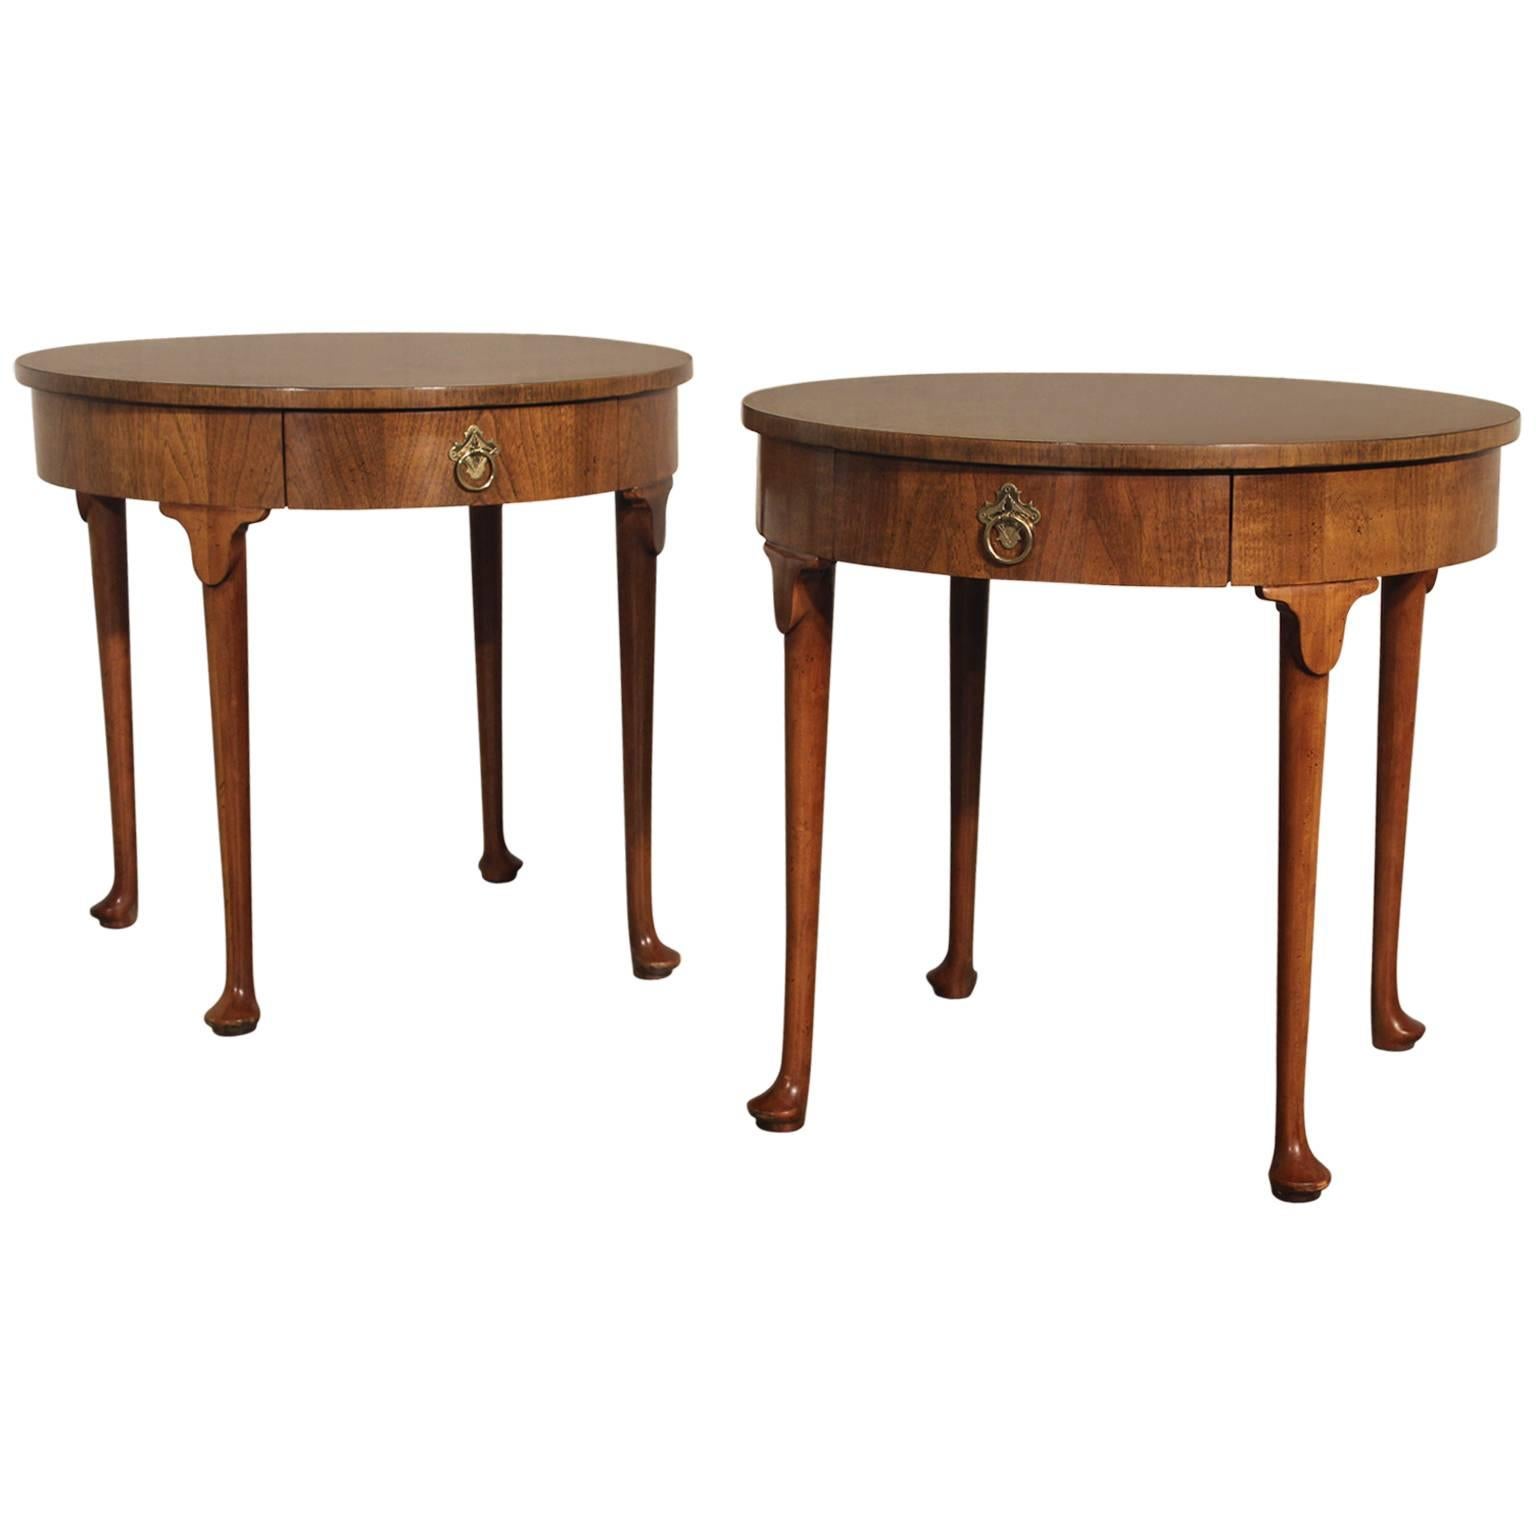 Vintage Pair of Baker Georgian Style Round End Tables from Old World Line